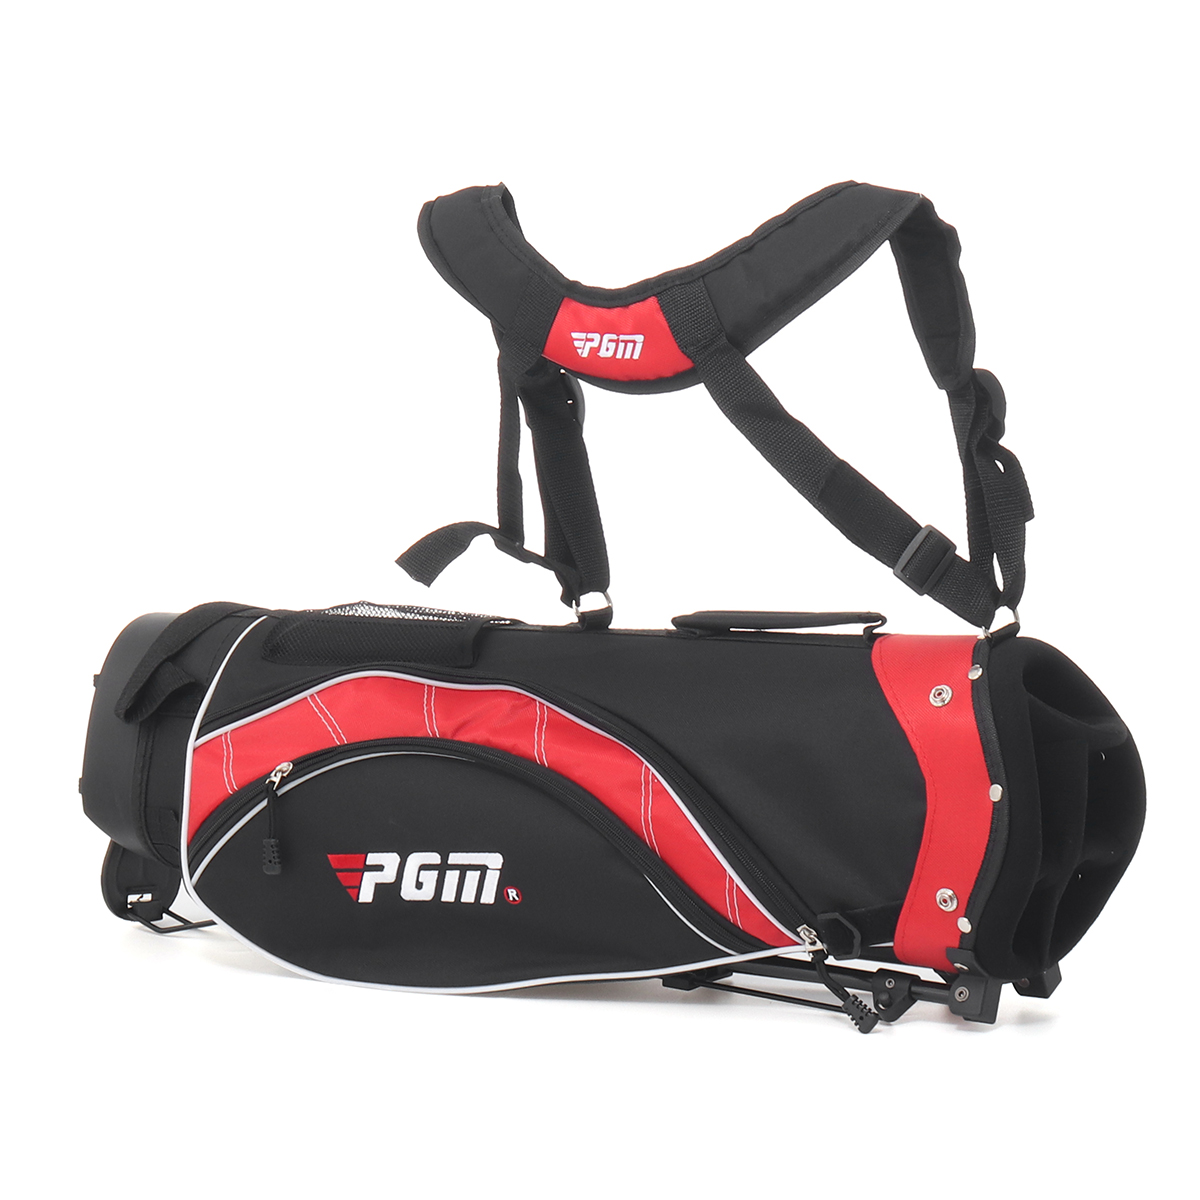 Childrens-Golf-Bag-Golf-Support-Ultra-Light-Stand-Portable-Large-Capacity-Double-Shoulder-Strap-For--1810143-8